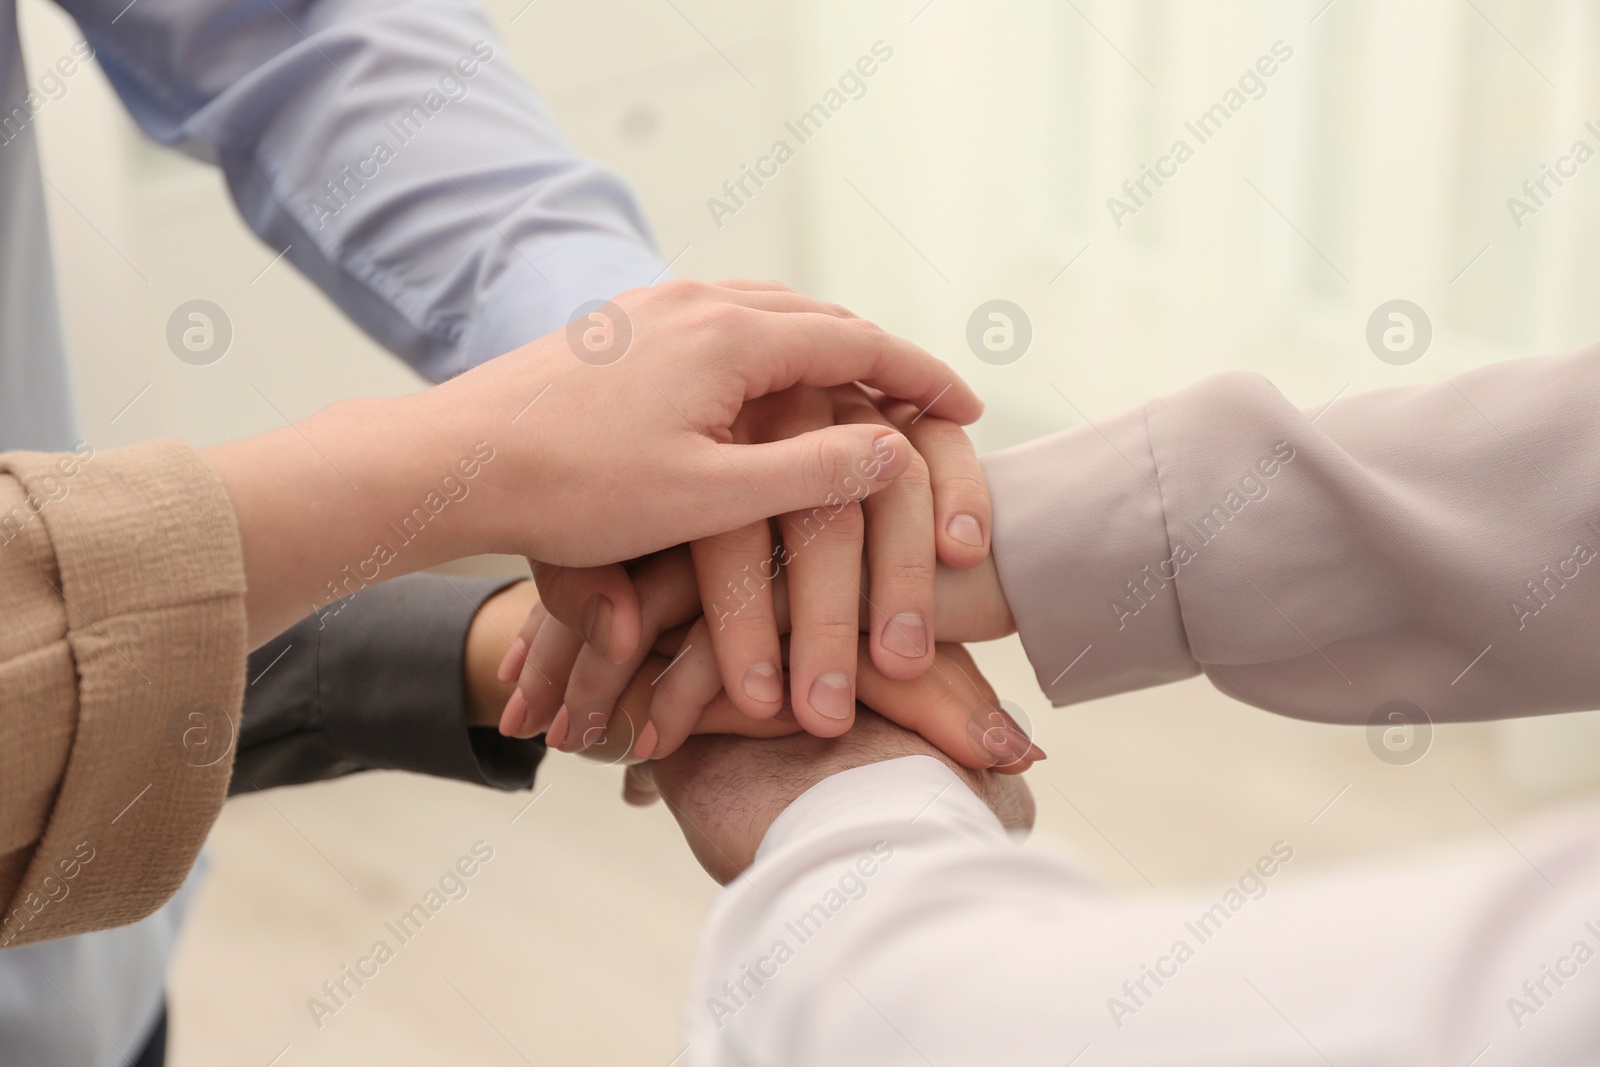 Photo of Group of people holding their hands together on blurred background, closeup